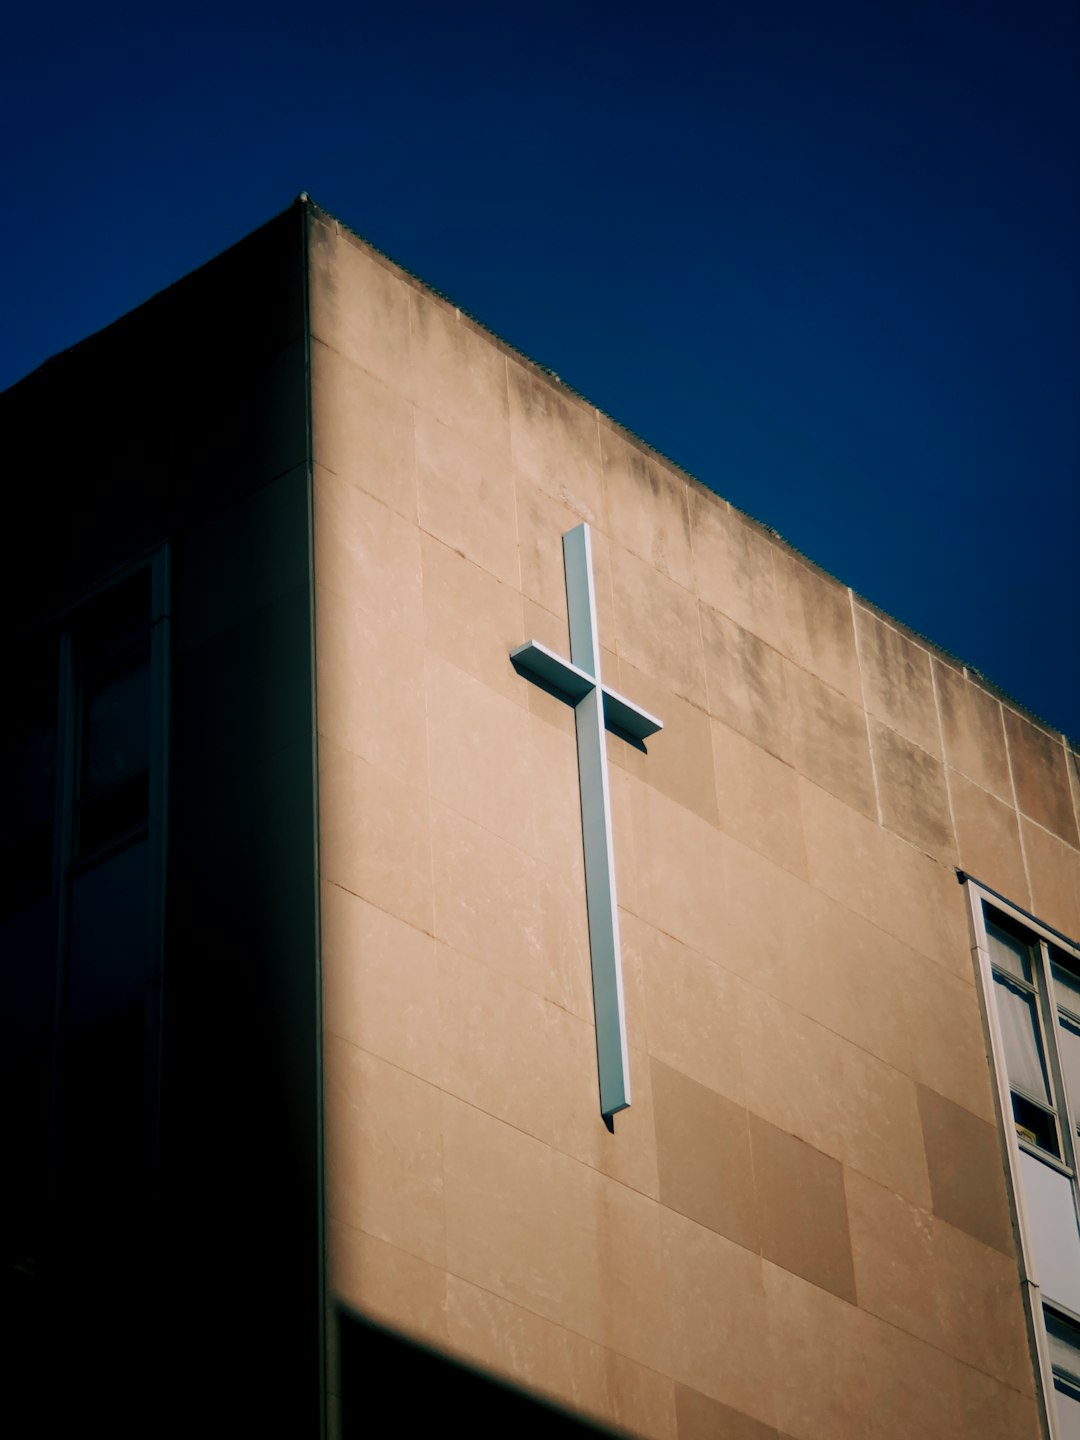 white cross on brown concrete building